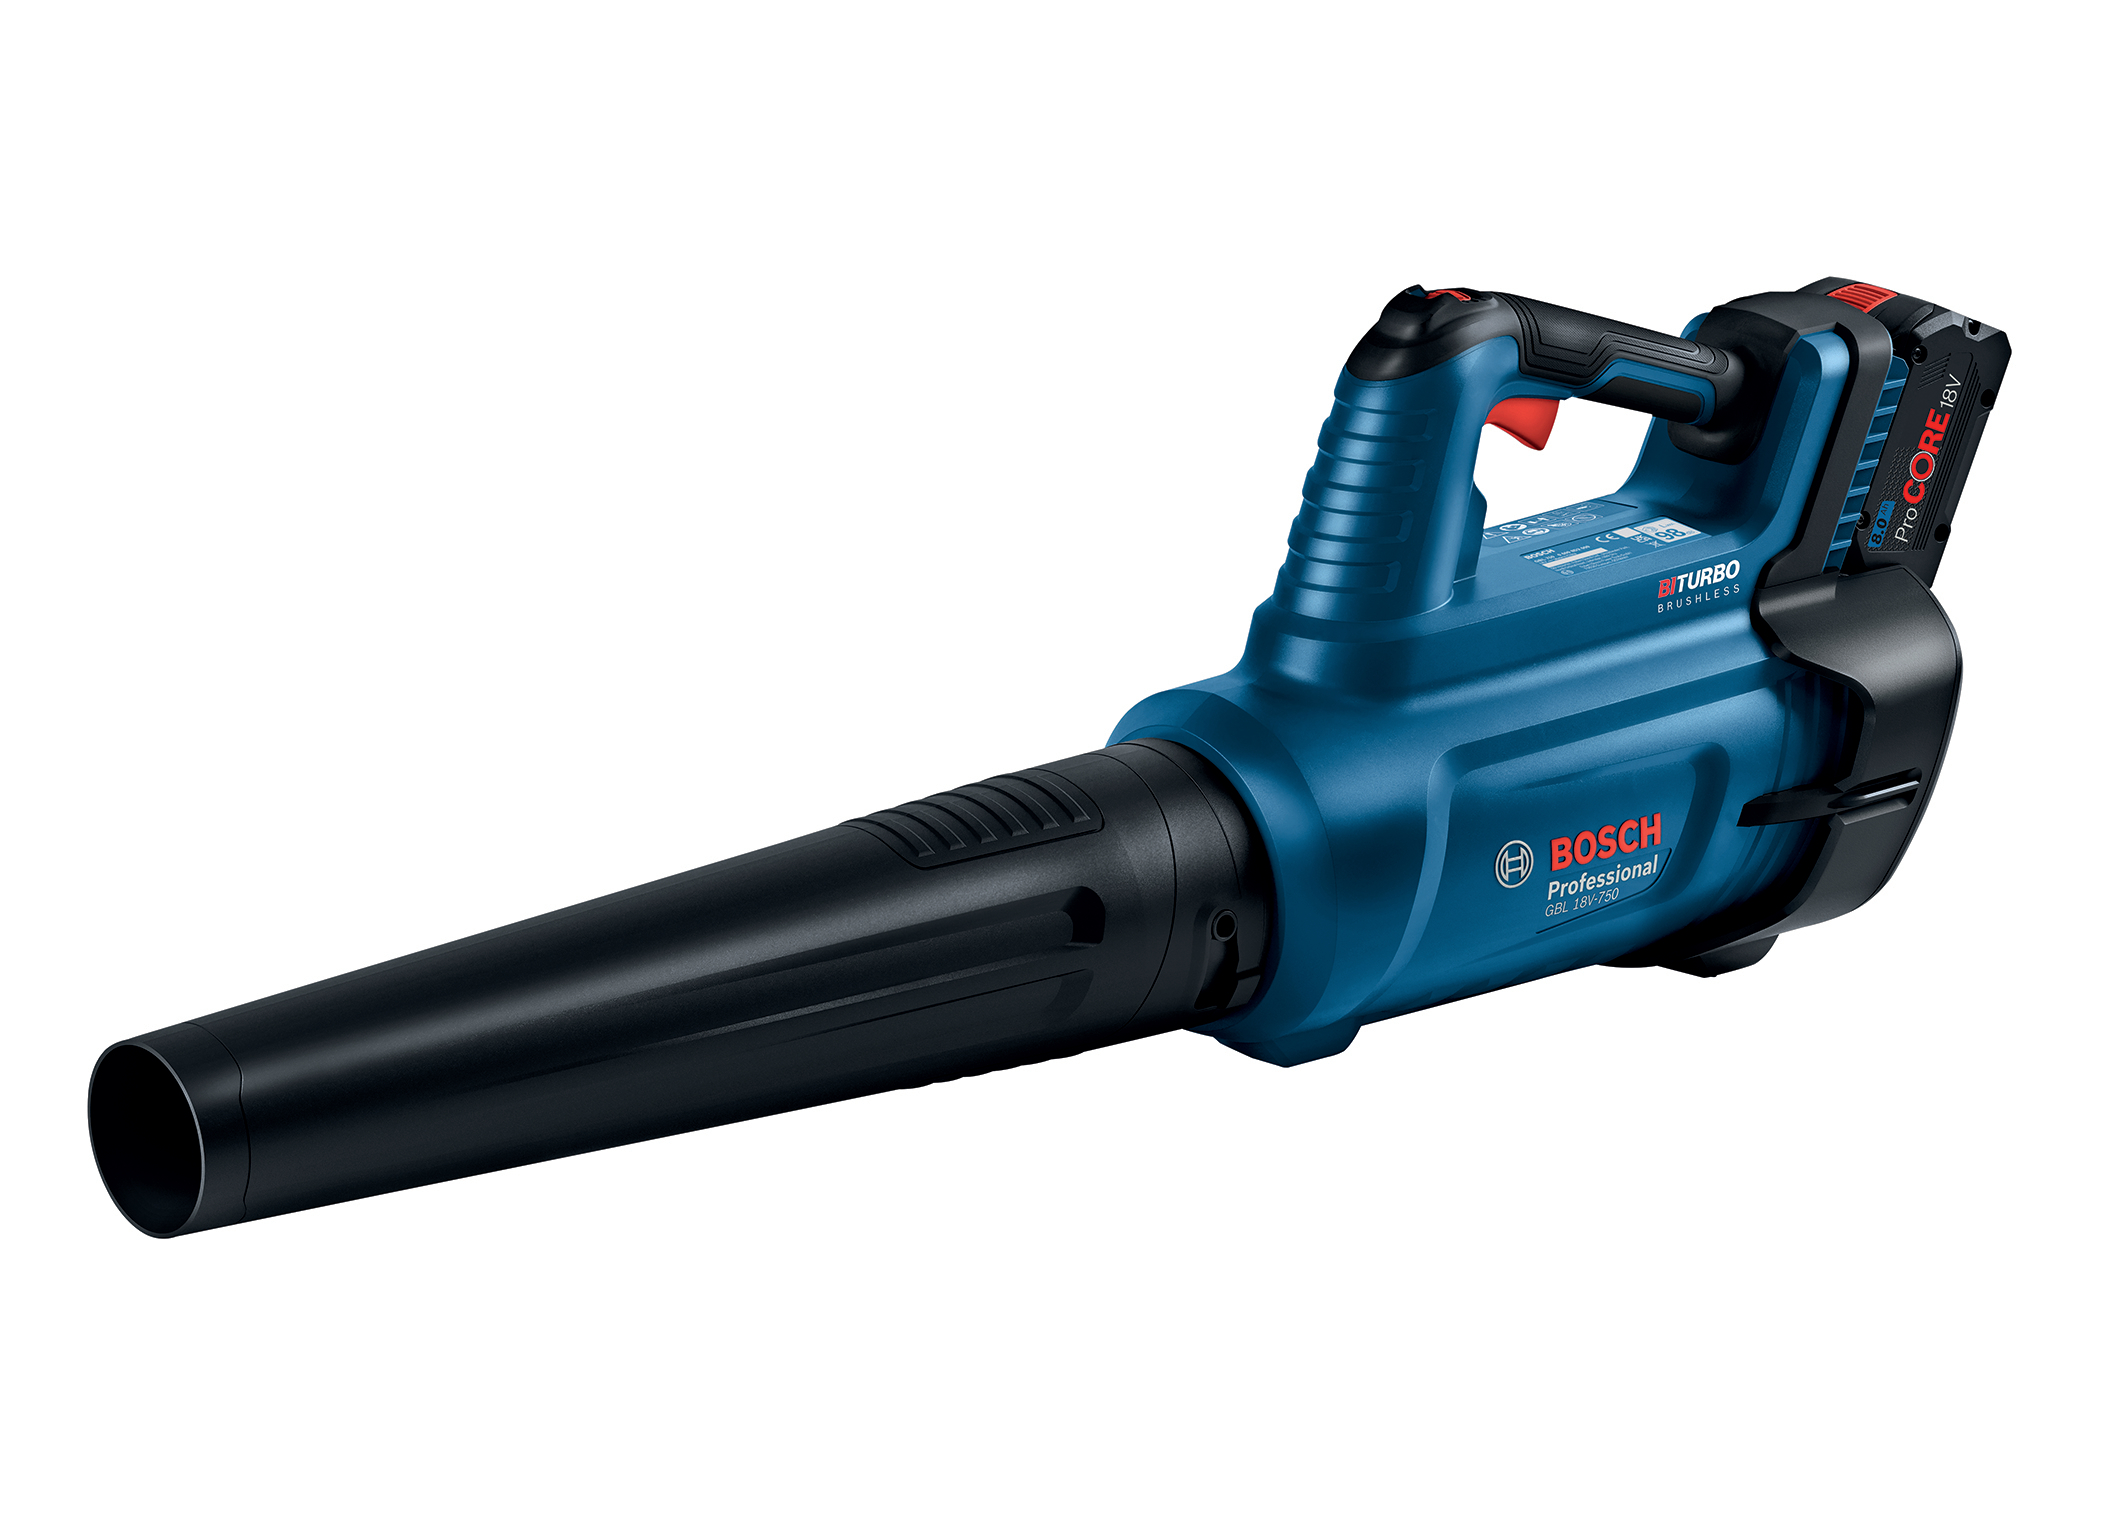 New growth in the Professional 18V System: Professional outdoor equipment like a Biturbo leaf blower from Bosch